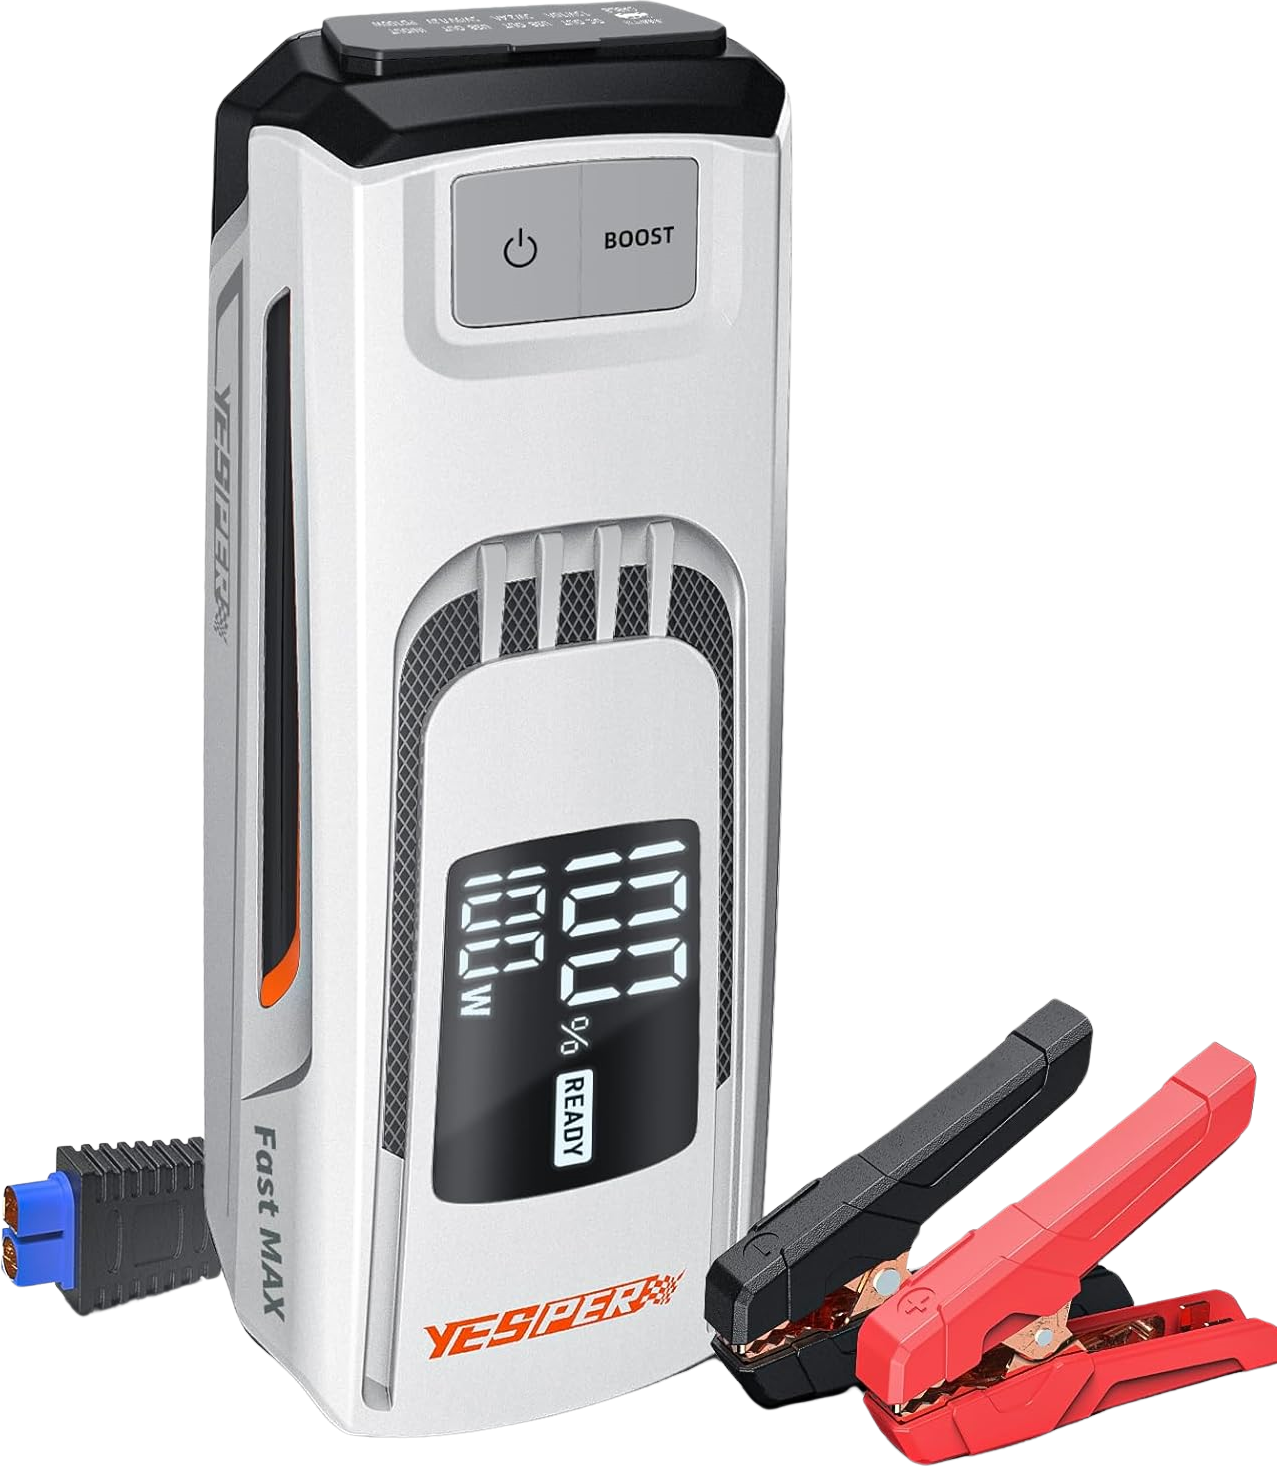 Yesper FAST-MAX Jump Starter Boost Battery Pack 4120A 27000mAh 80 Starts for 12V Vehicles Up To All Gas and 10L Diesel Engines New